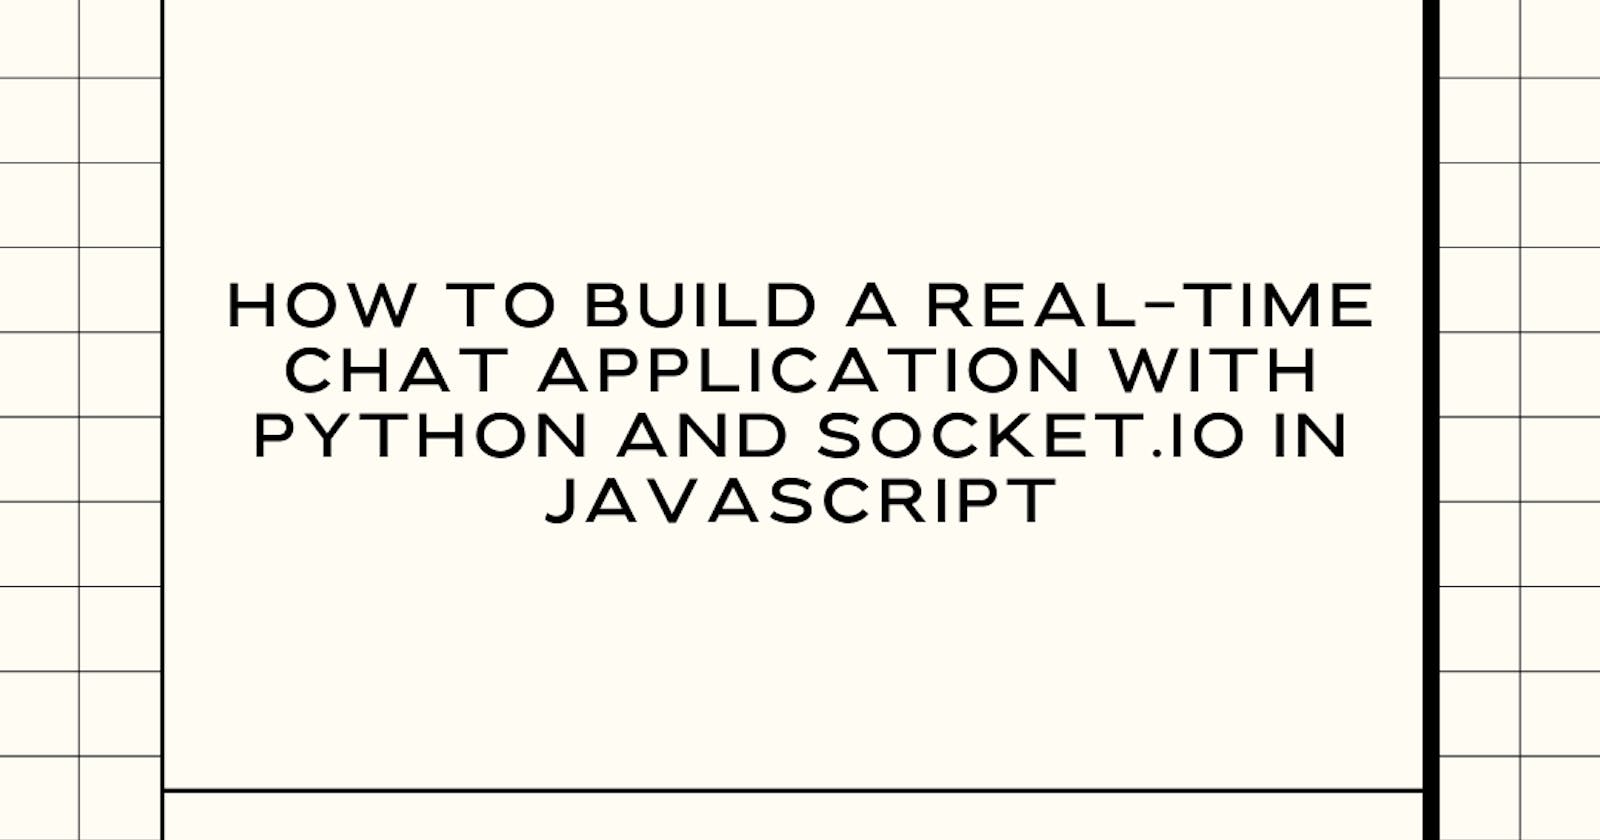 How to Build a Real-Time Chat Application with Python and Socket.io in JavaScript